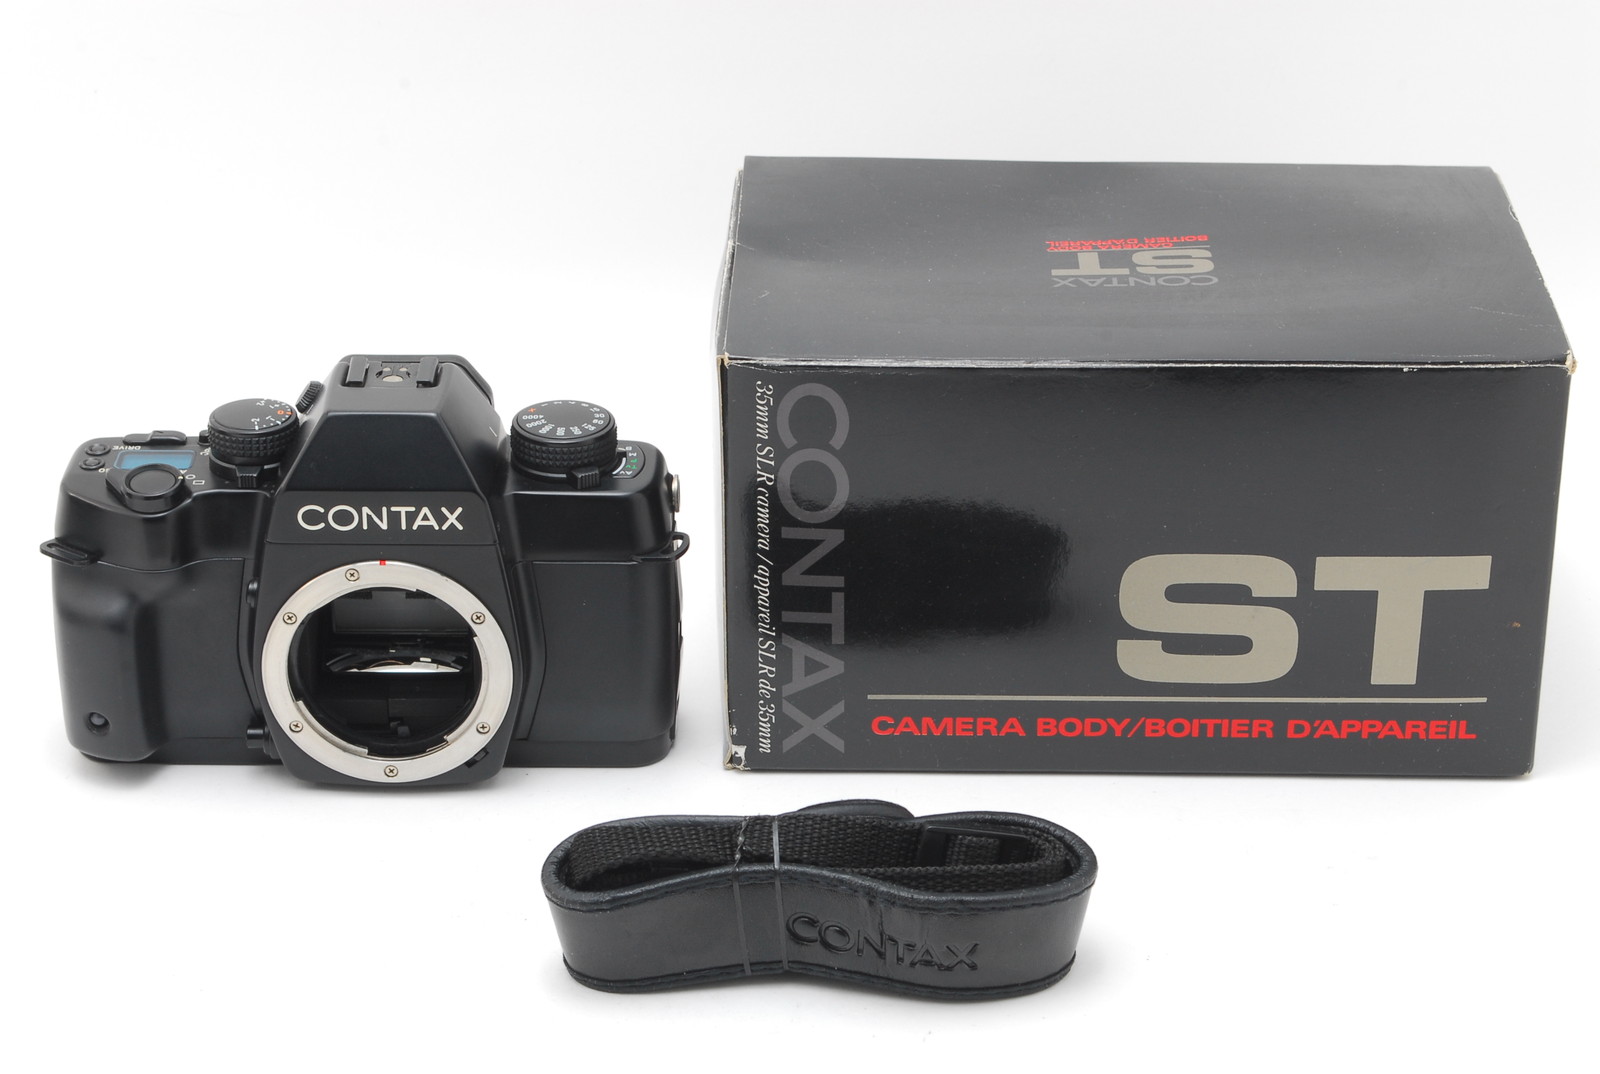 PROMOTION.NEAR MINT Mirror Replaced Contax ST 35mm SLR Film Camera, Box, Strap from Japan